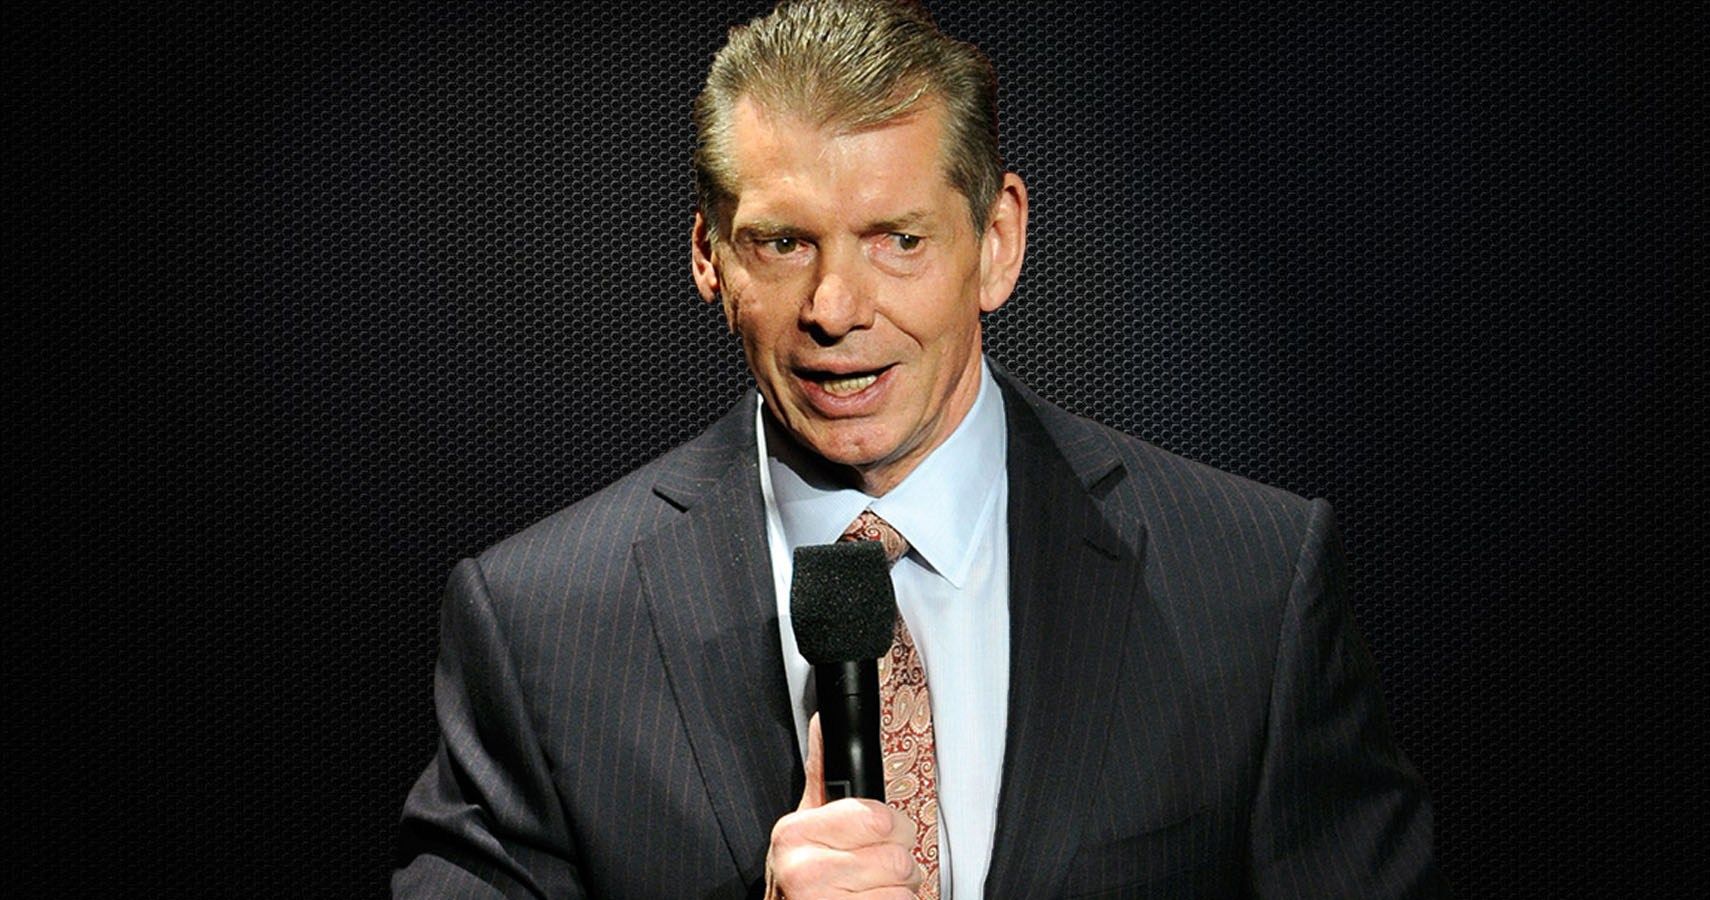 Every Version Of Vince McMahon, Ranked From Worst To Best